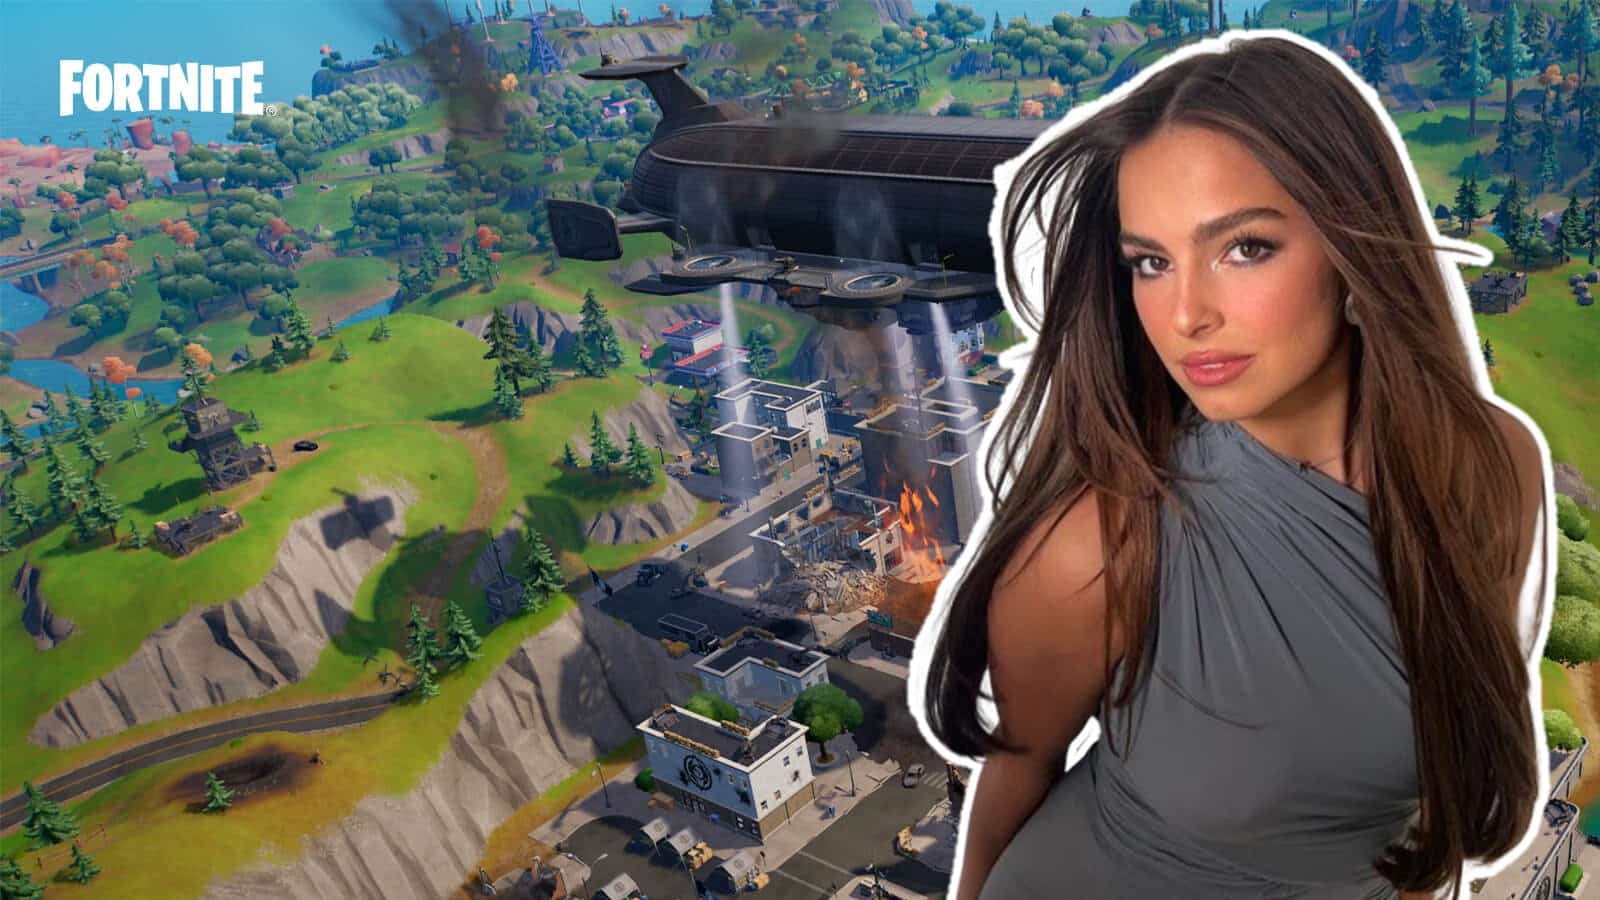 A Fortnite collab with Addison Rae could be coming.